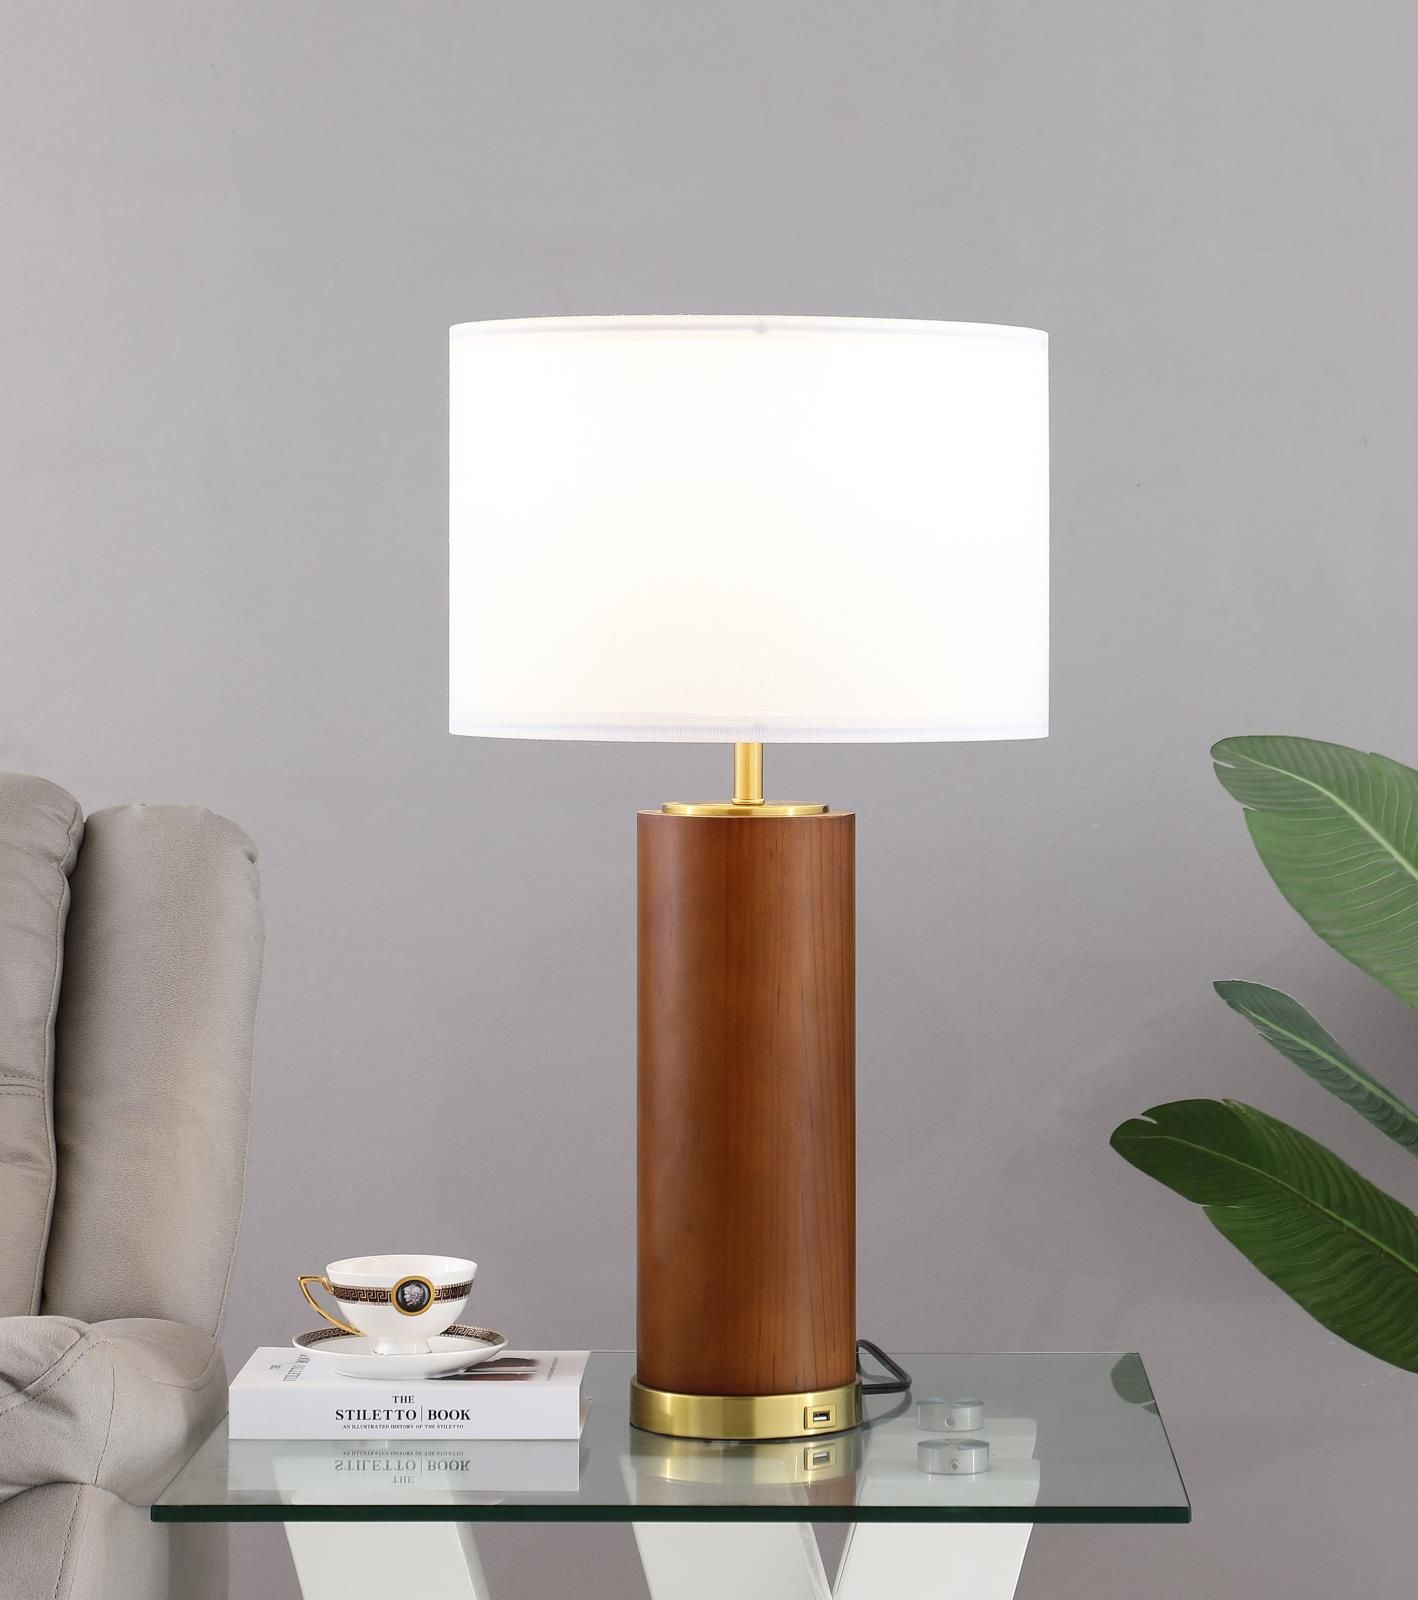 Gbedside Lamps Online Find the Perfect Lighting Solution for Your Bedroom Decor With These Stylish Options